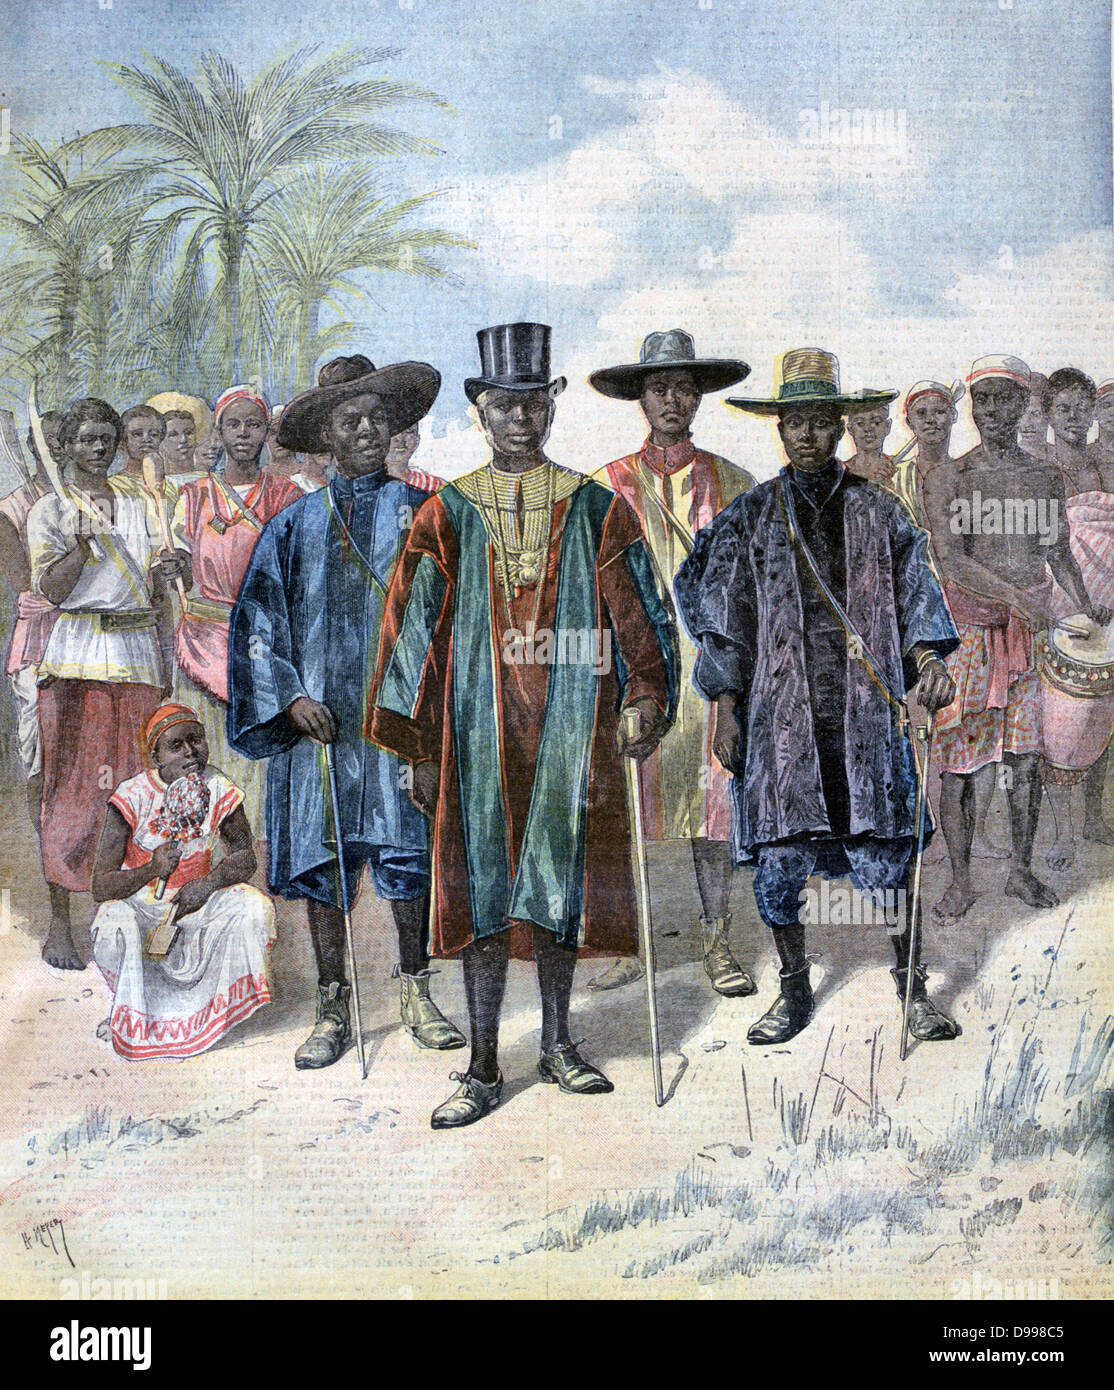 Prince Kosko and four of King Tiffa of Dahomey's ministers and their retinue in the Champ-de-Mars, Paris. From 'Le Petit Journal', Paris, 22 April 1893.  France, Africa, Colonialism, Benin Stock Photo